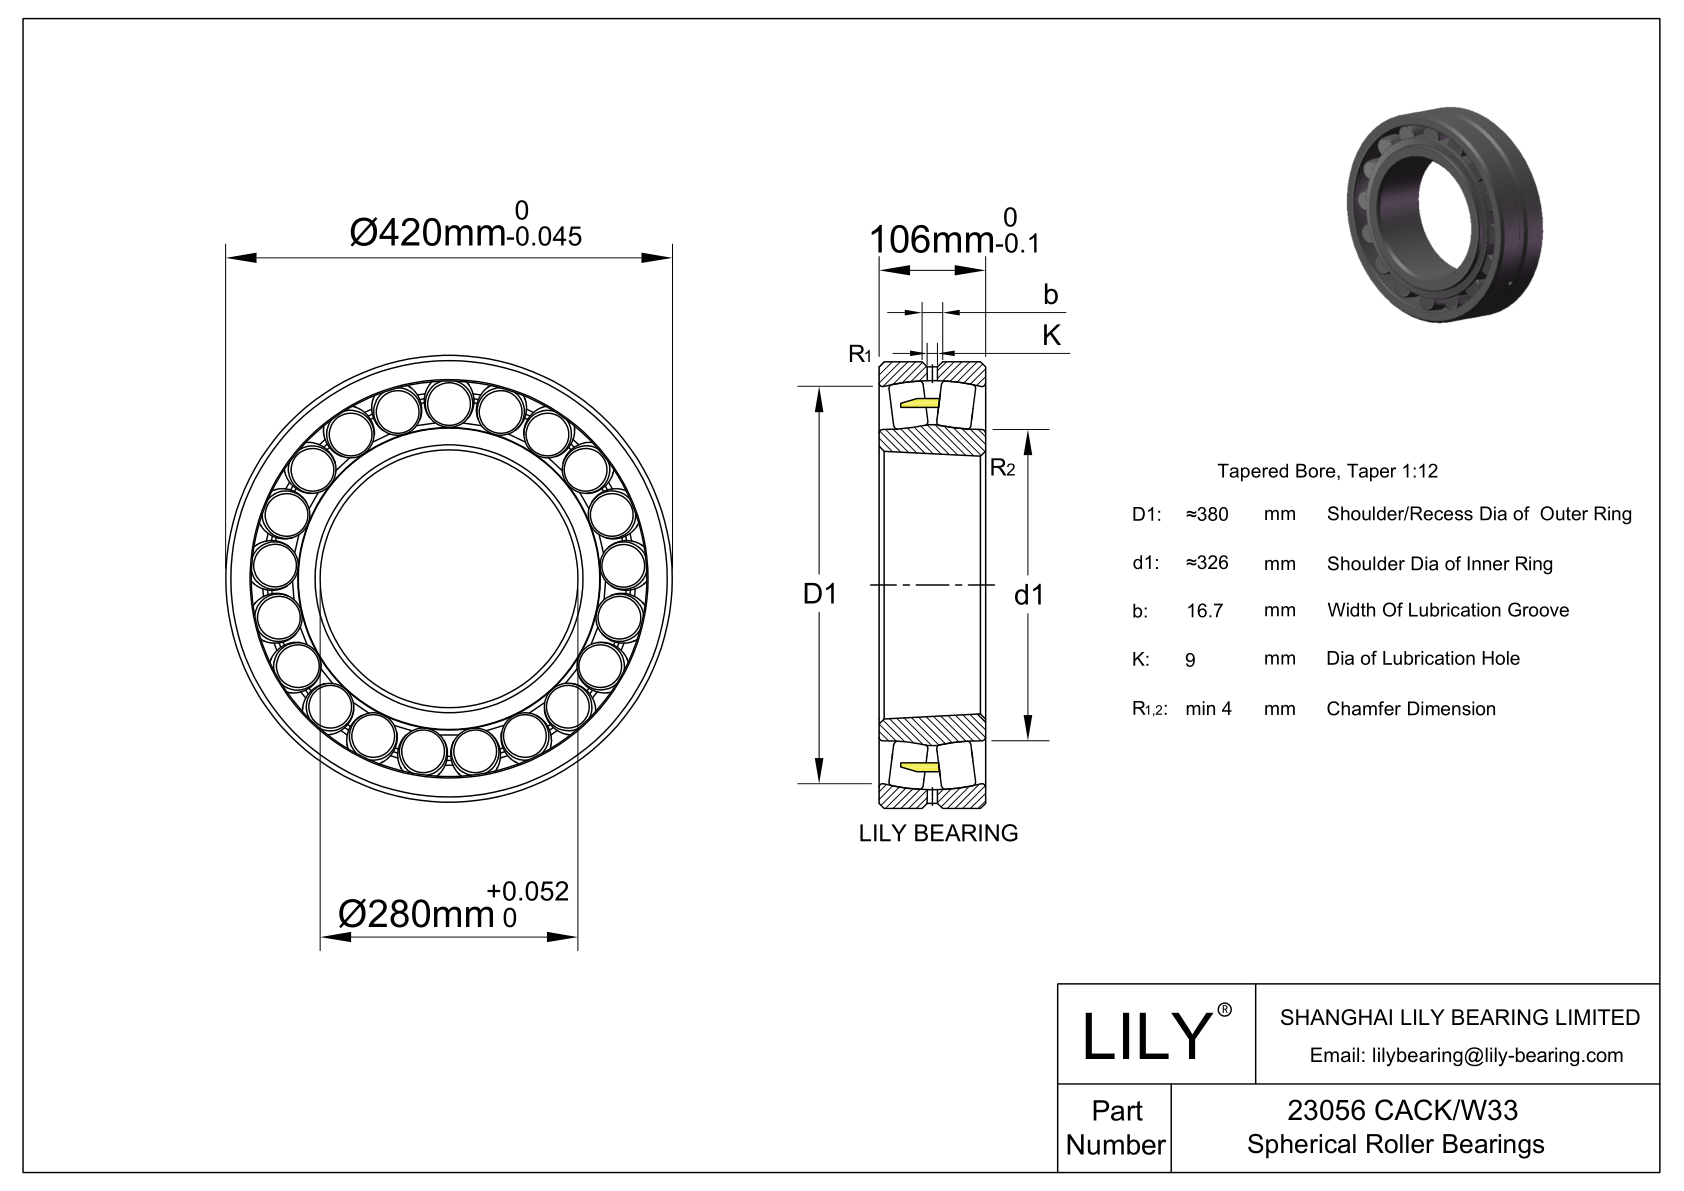 23056 CACK/W33 Double Row Spherical Roller Bearing cad drawing